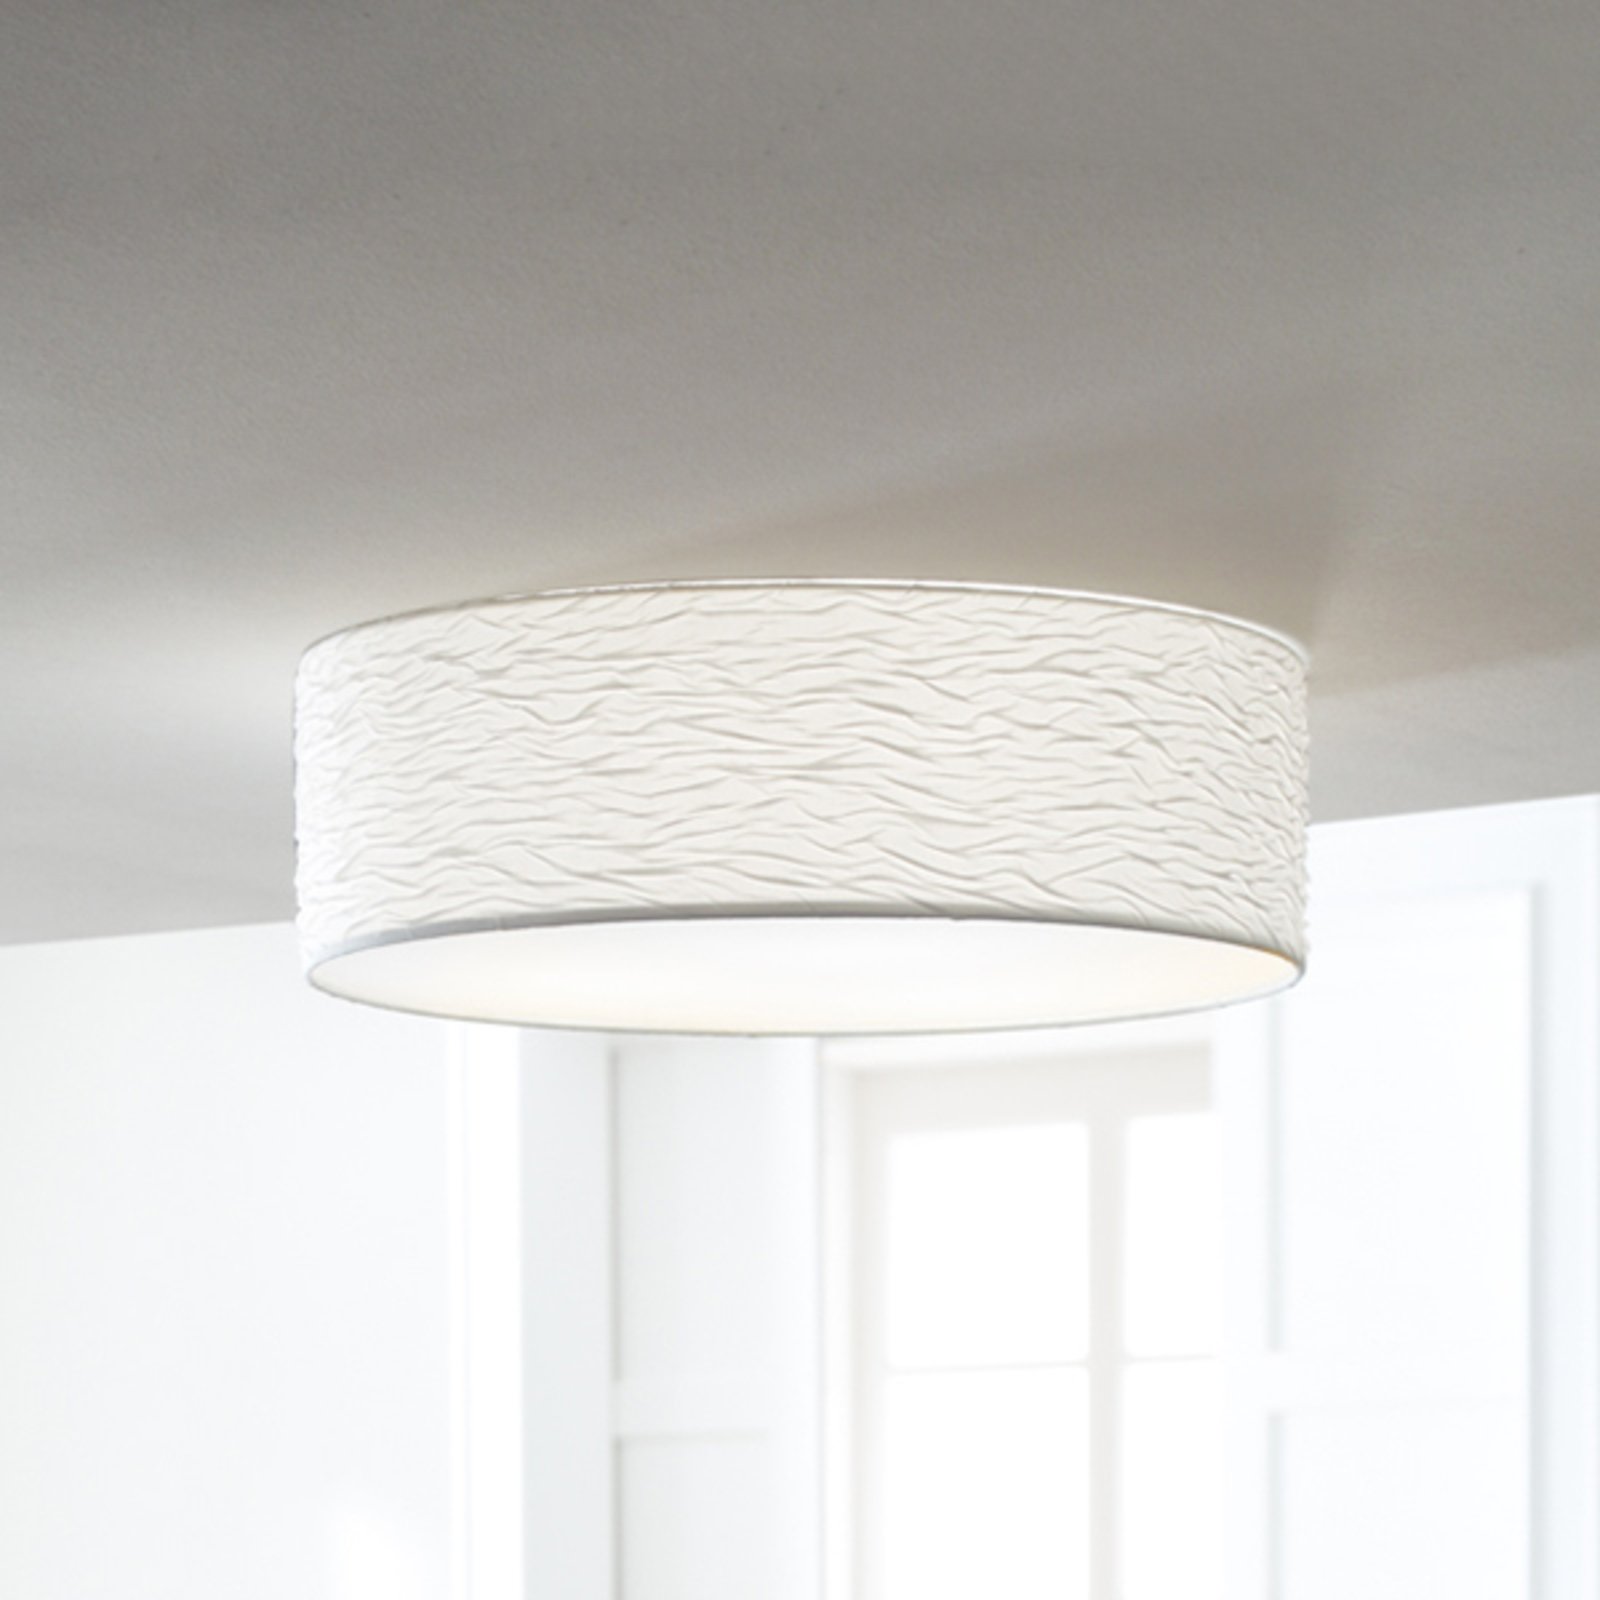 White Vita 3 ceiling light with pretty waves